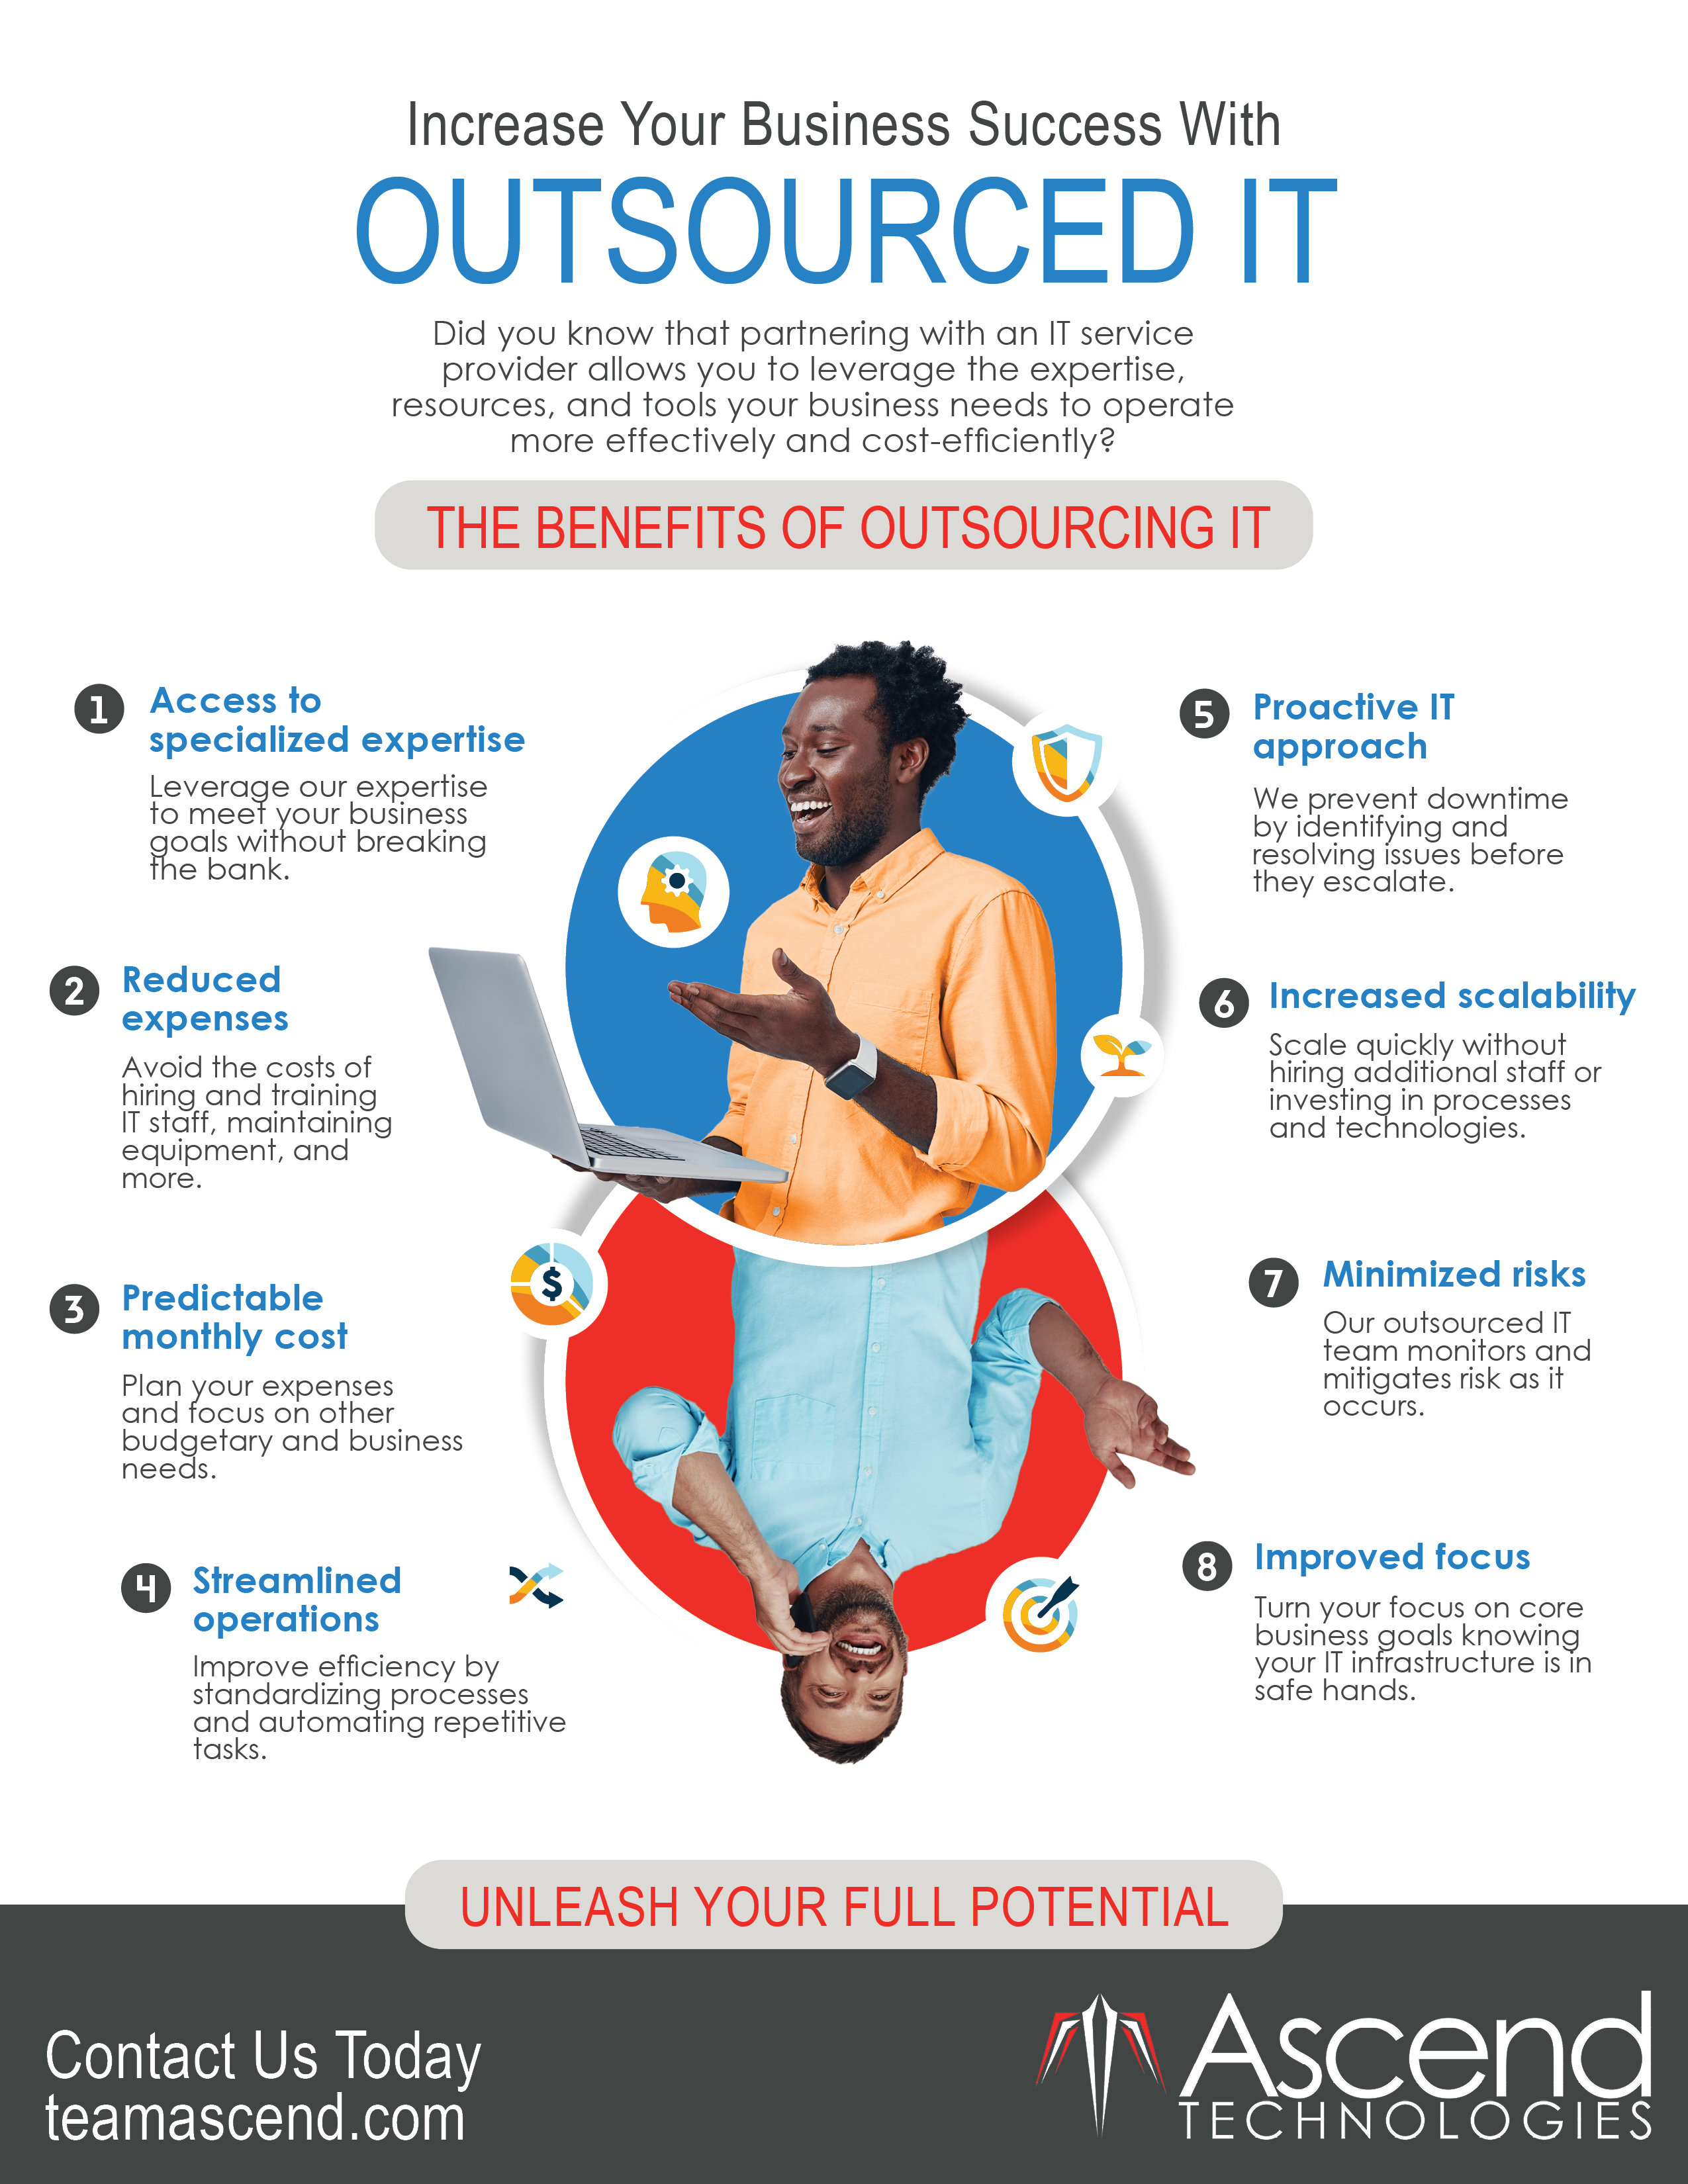 Benefits of Outsourced IT Infographic_Working File